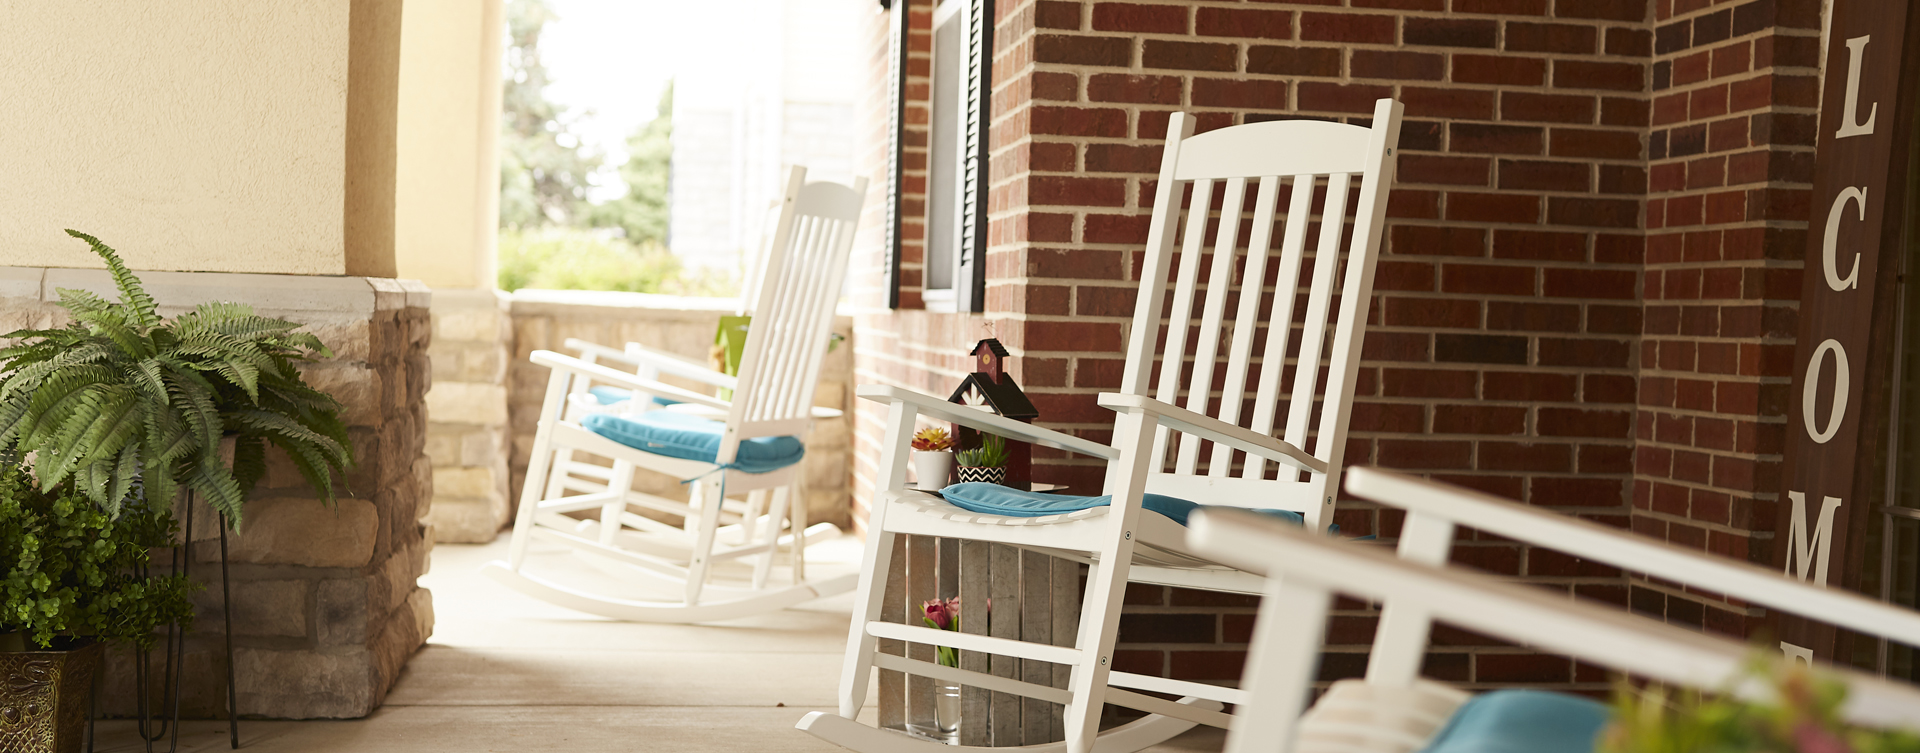 Enjoy conversations with friends on the porch at Bickford of Springfield